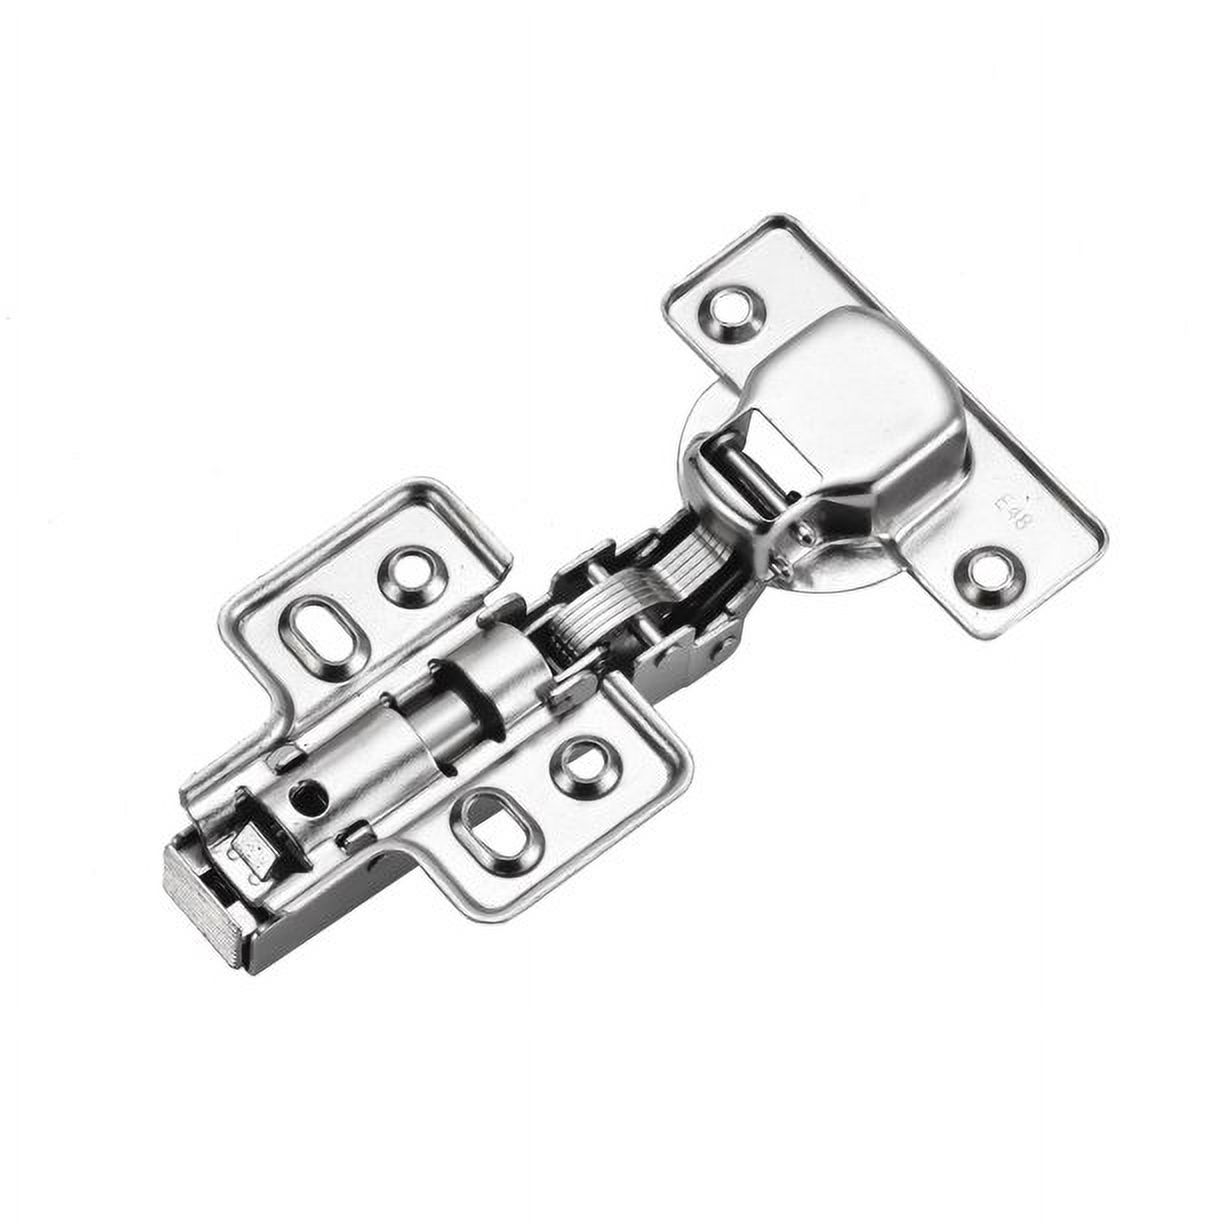 Luokim 4pcs Standard Cabinet Hinge,Fit for Frameless Cabinet,European Full Overlay,Soft Closing,Four-Hole mounting Plate Hinges,Nickel Plated Finish - image 4 of 7